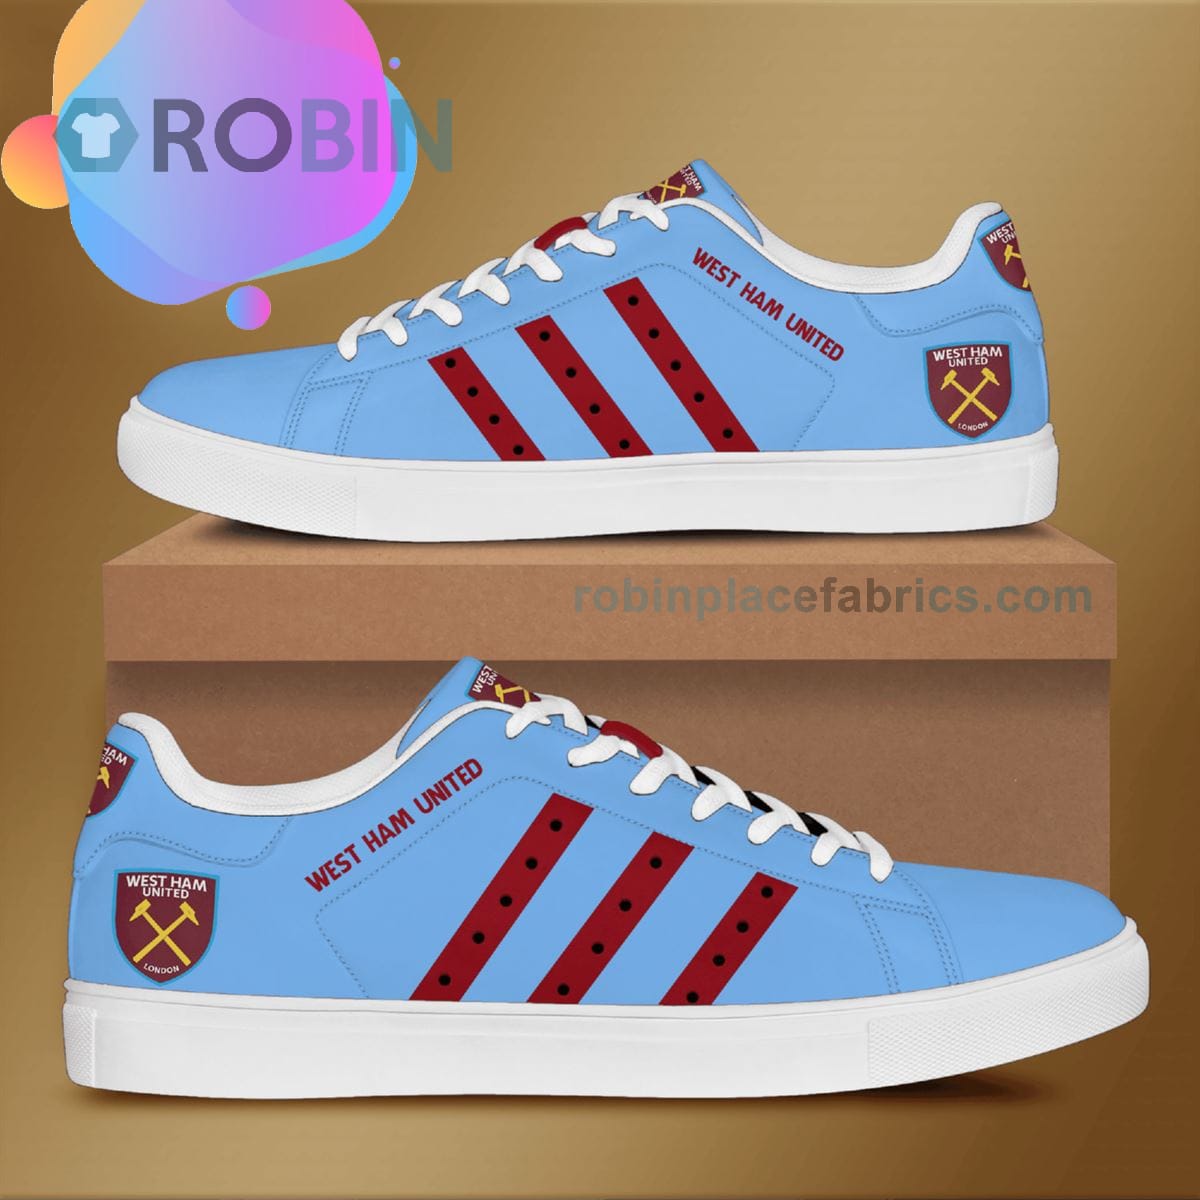 West Ham United Tennis Shoes - Stan Smith Sneaker